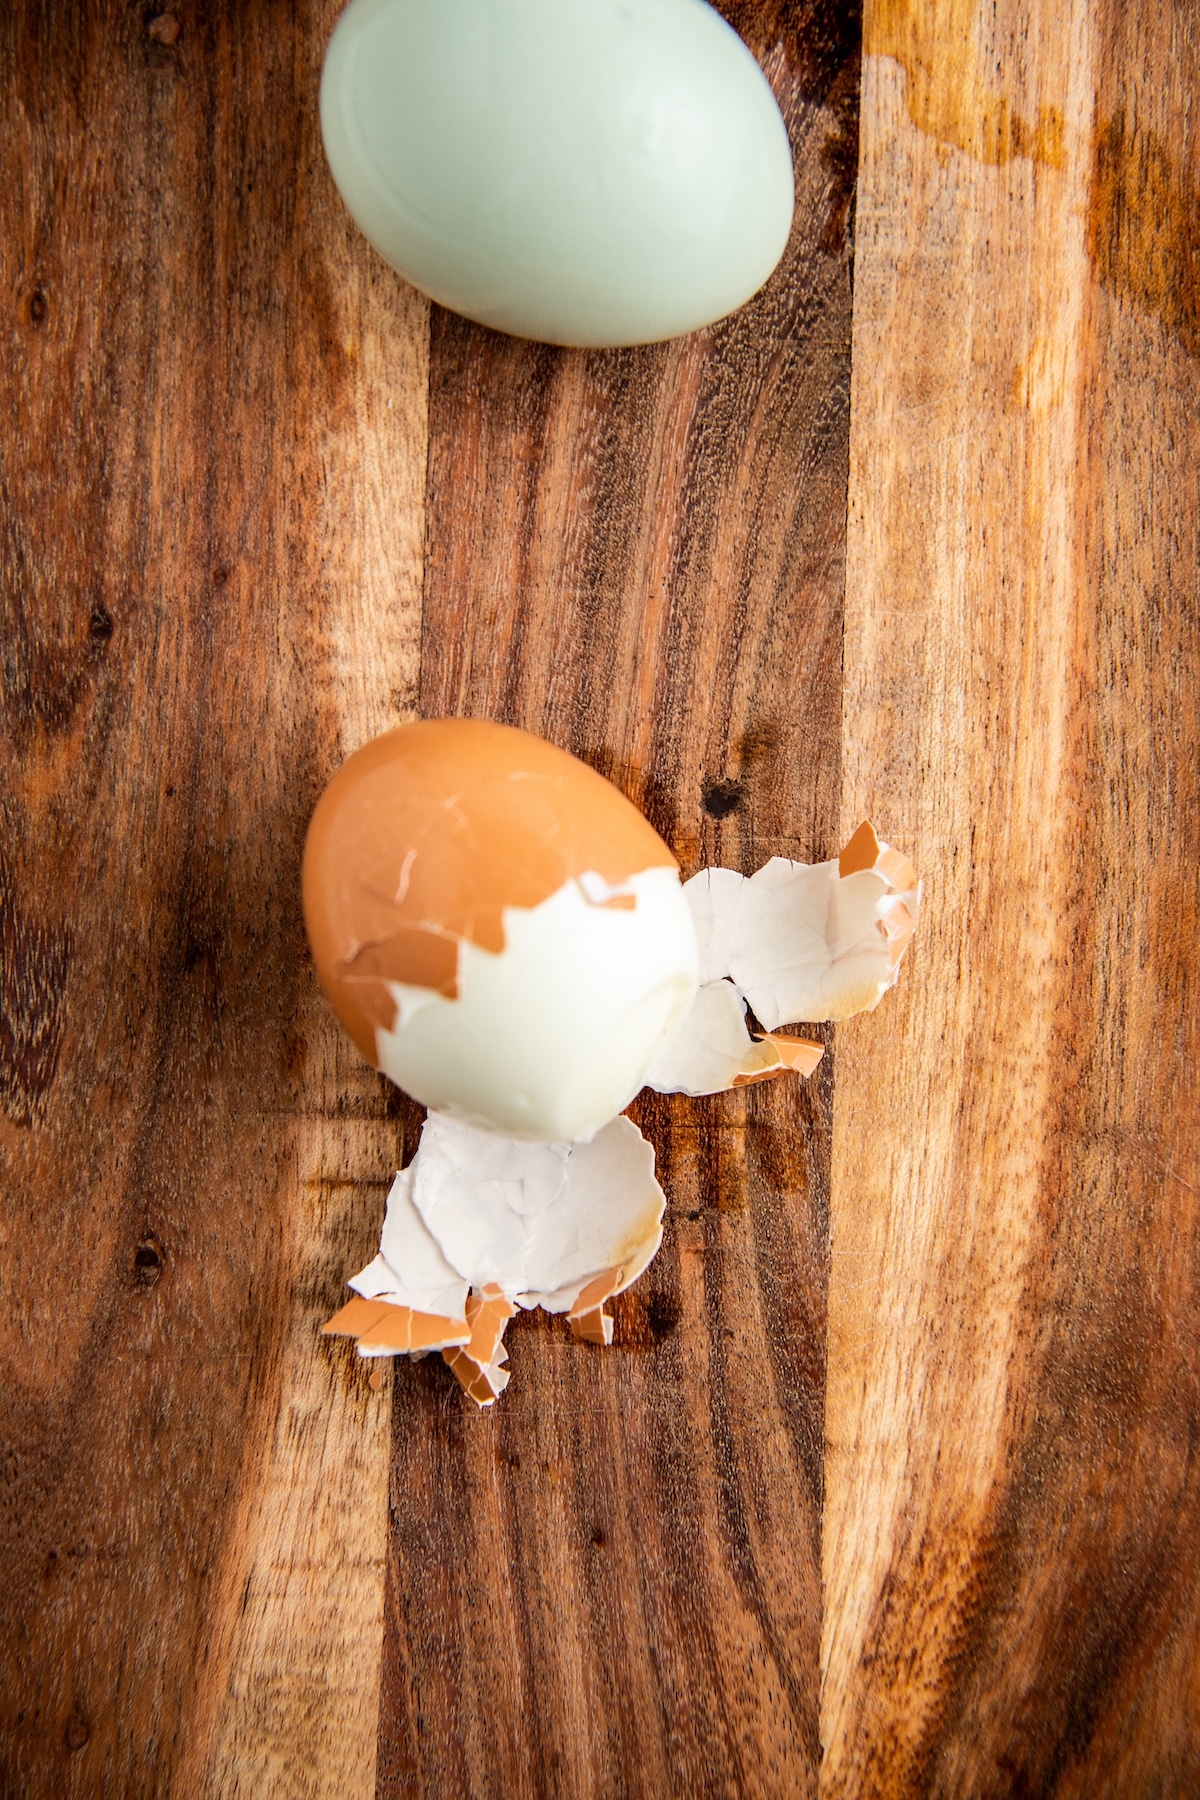 A hard boiled egg being peeled on a cutting board.